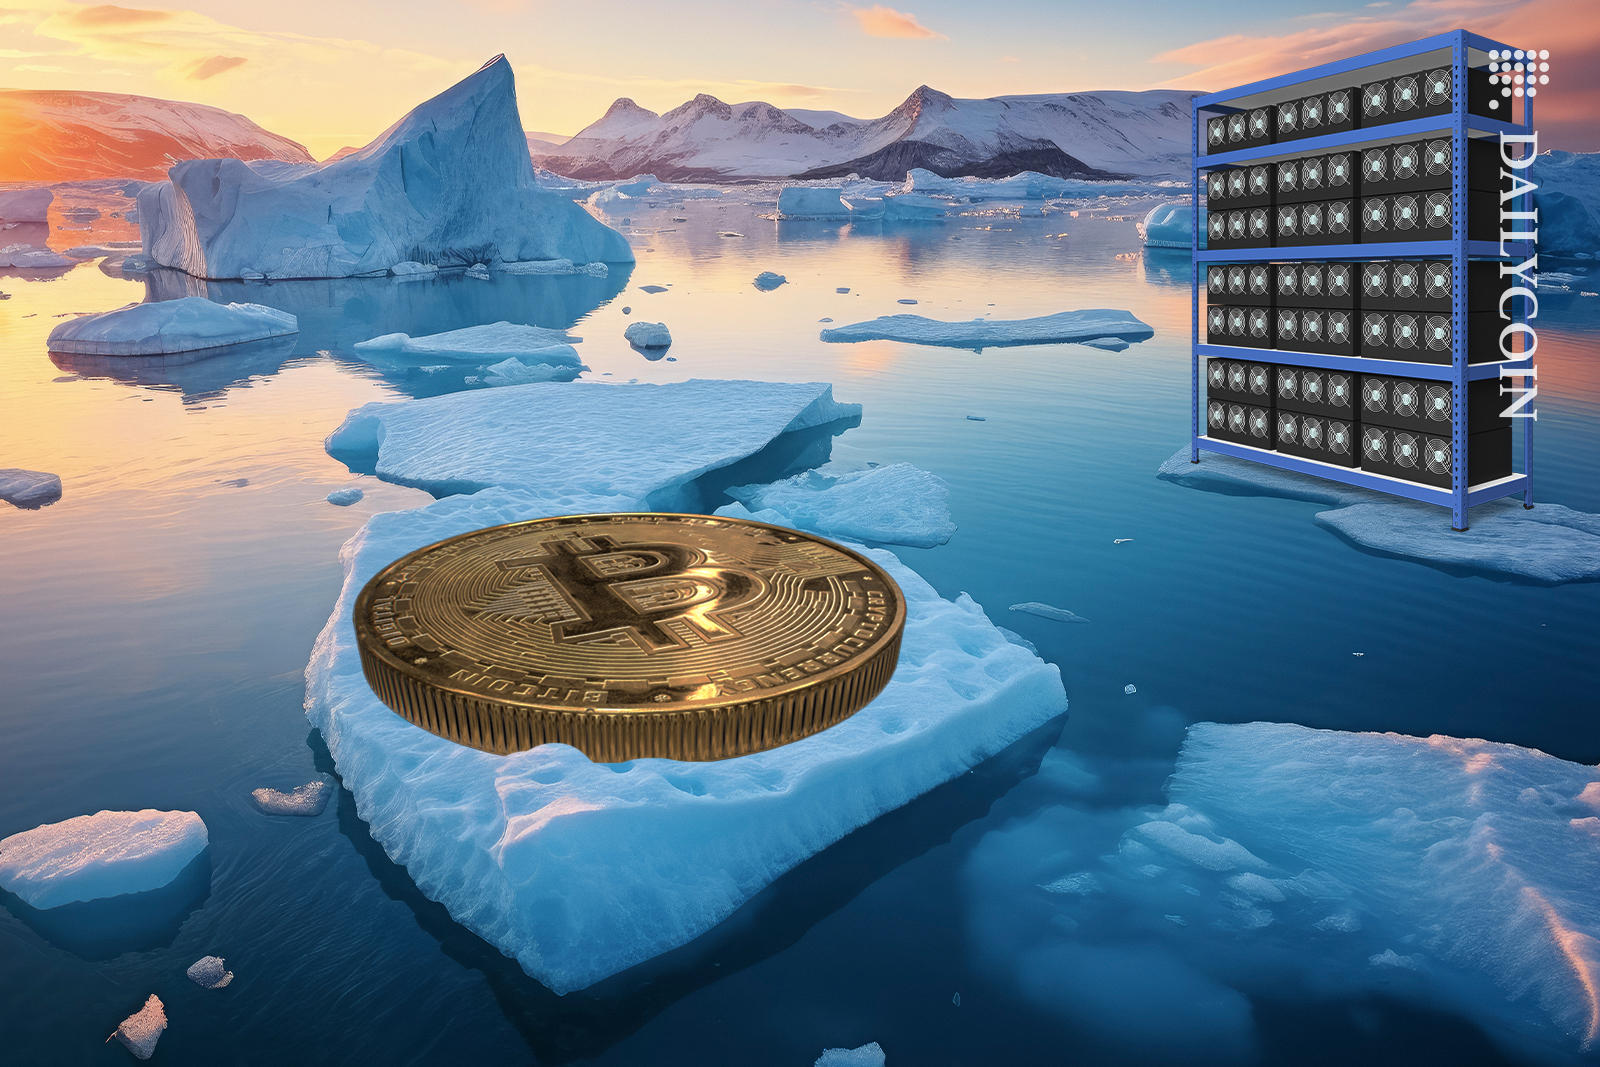 A Bitcoin floating on ice and a mining rig set on another ice block.